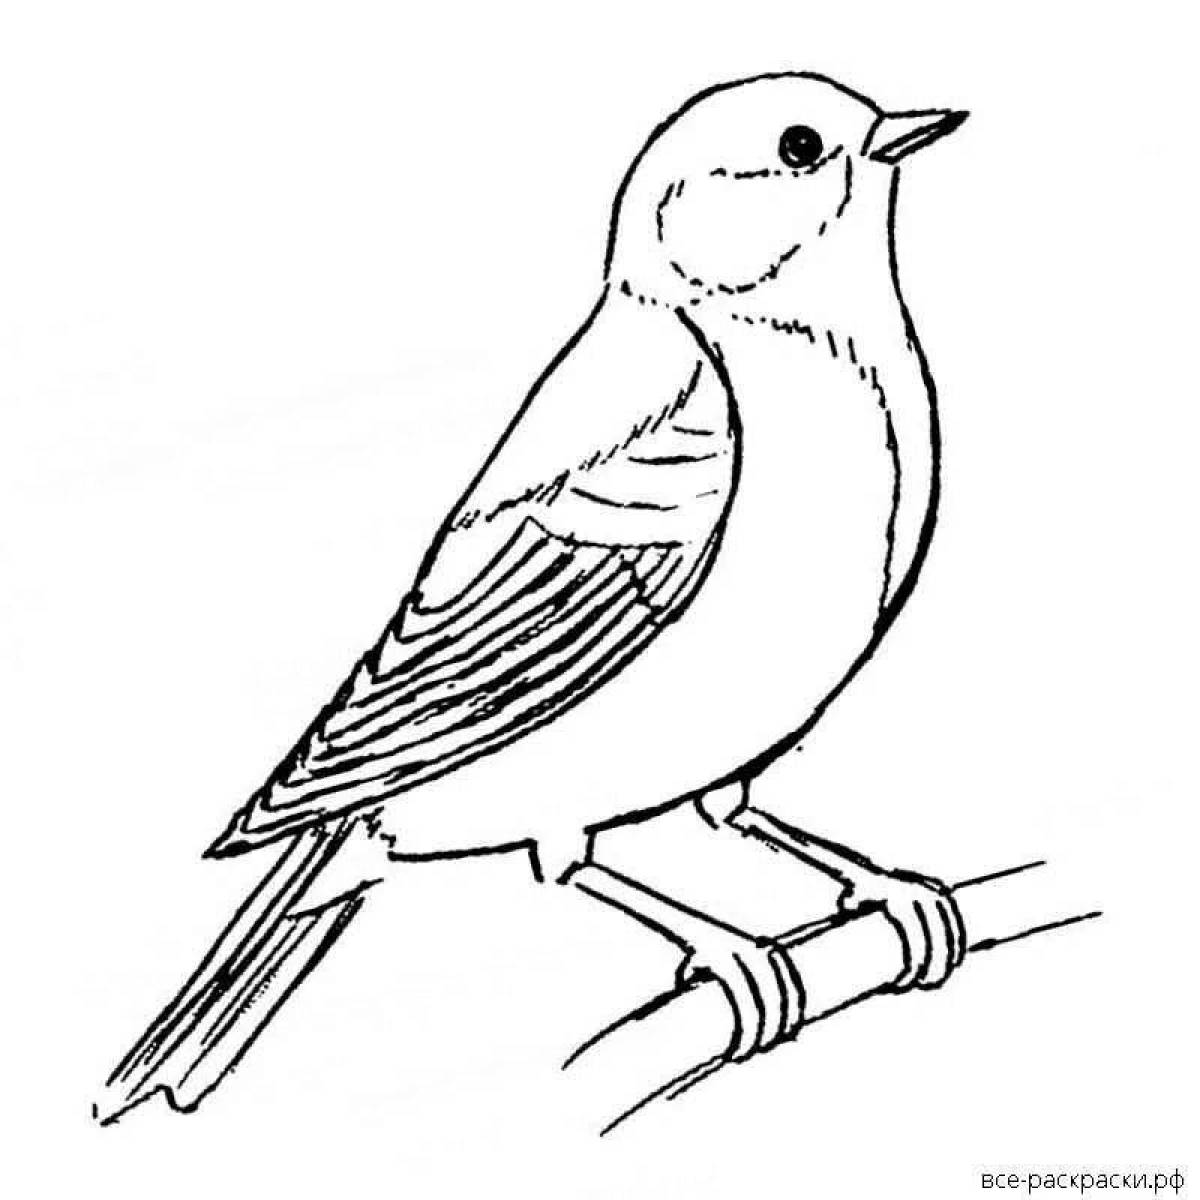 Glowing tit and bullfinch coloring page